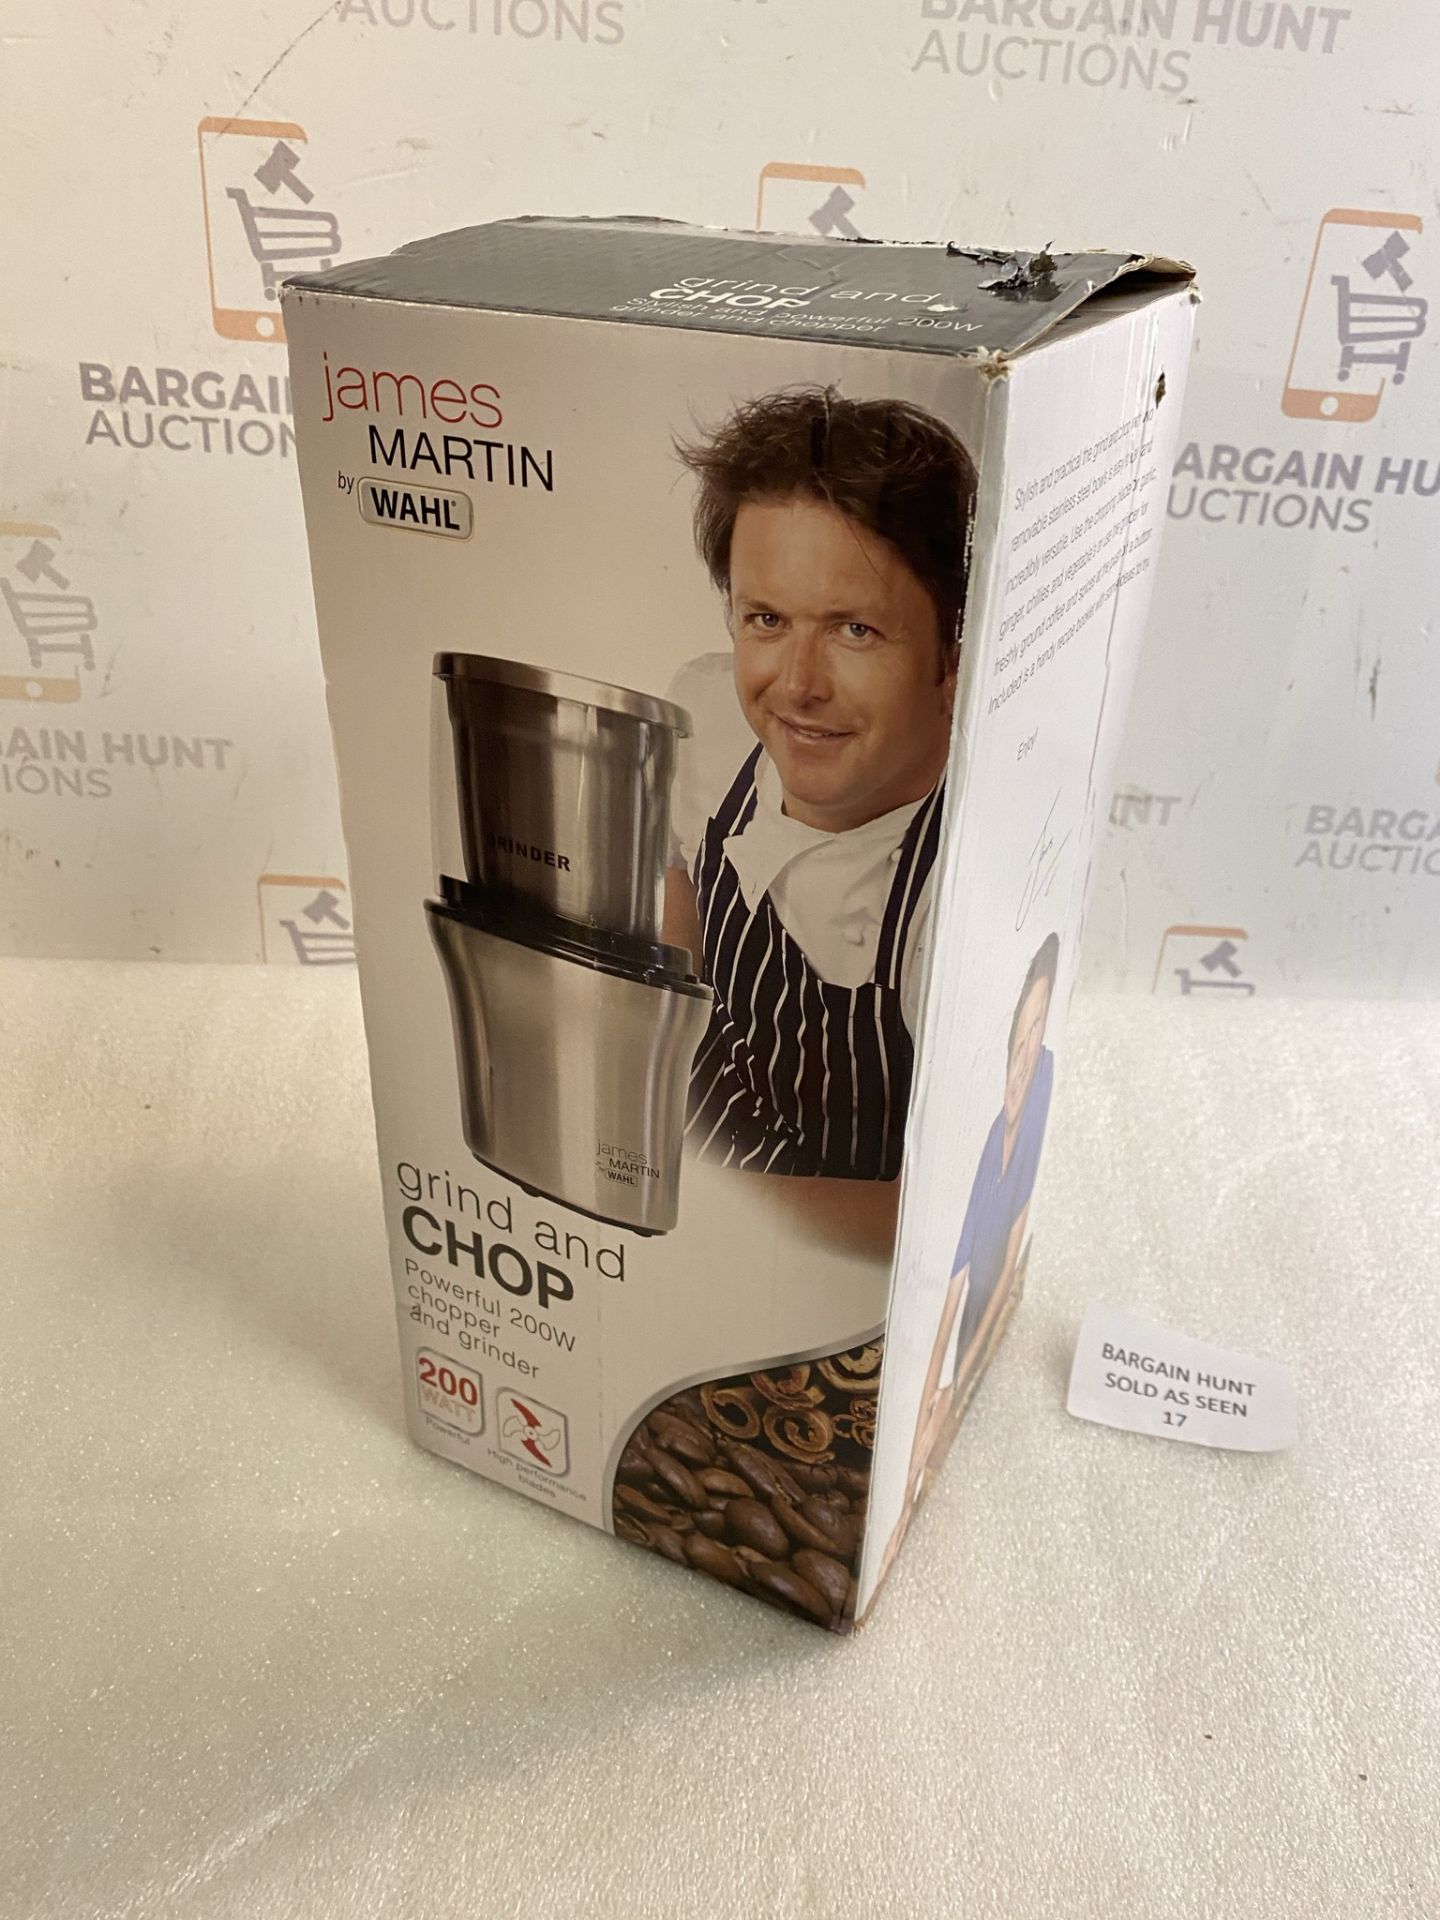 WahlZX889 James Martin Grind and Chop Electric Grinder RRP £32